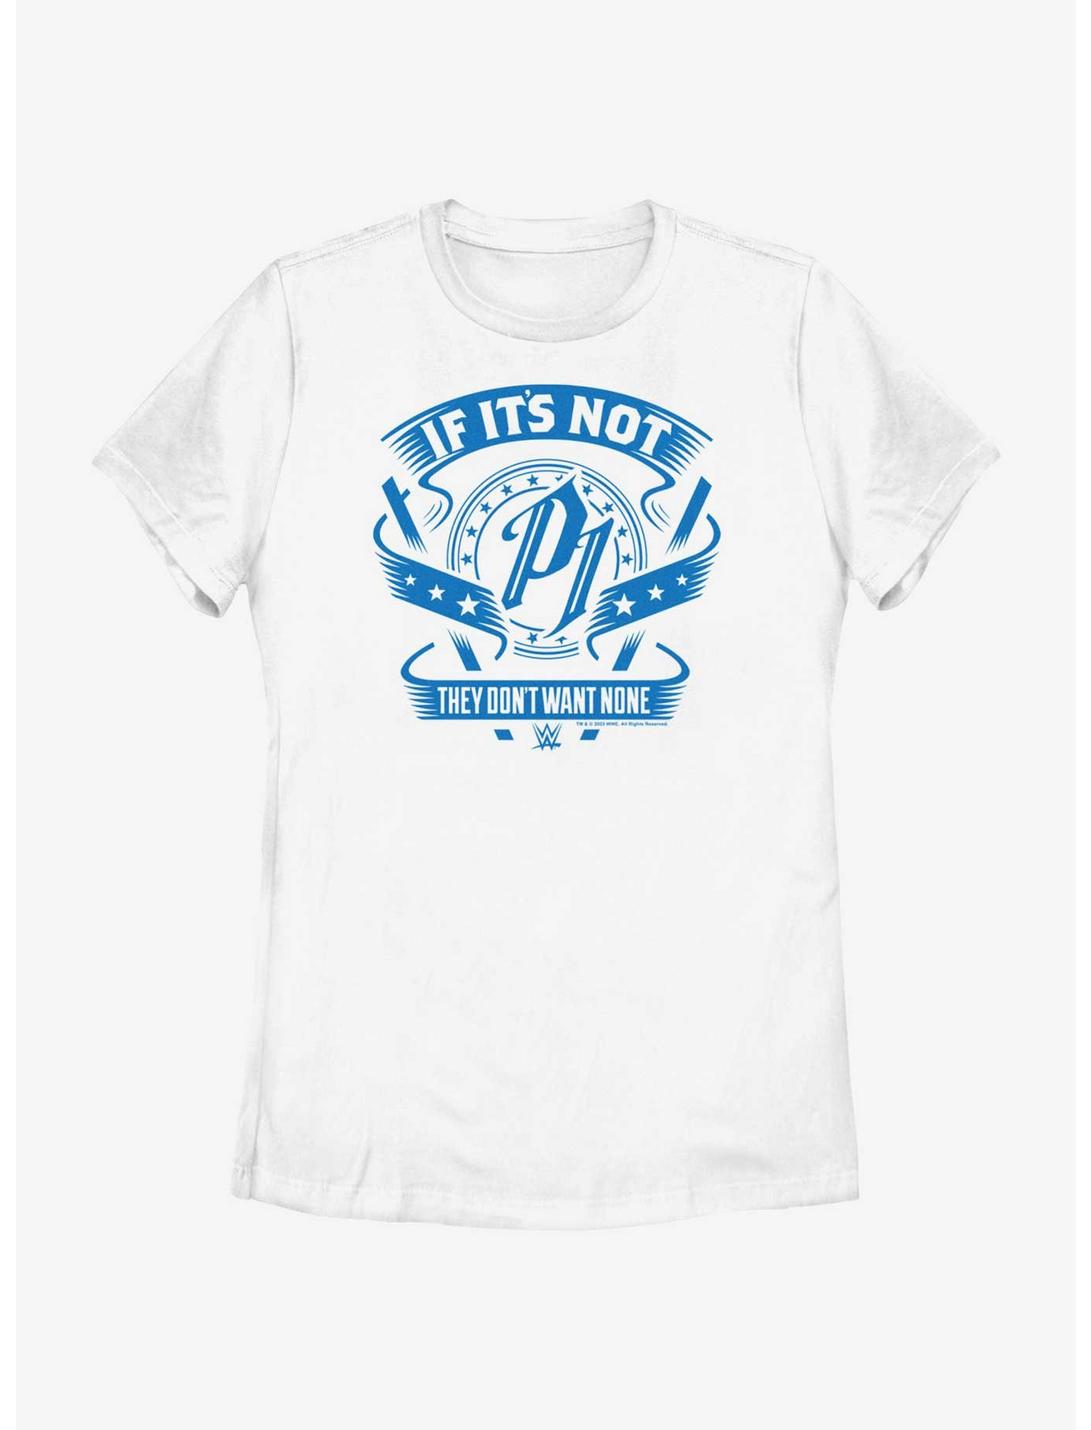 WWE AJ Styles They Don't Want None Womens T-Shirt, WHITE, hi-res